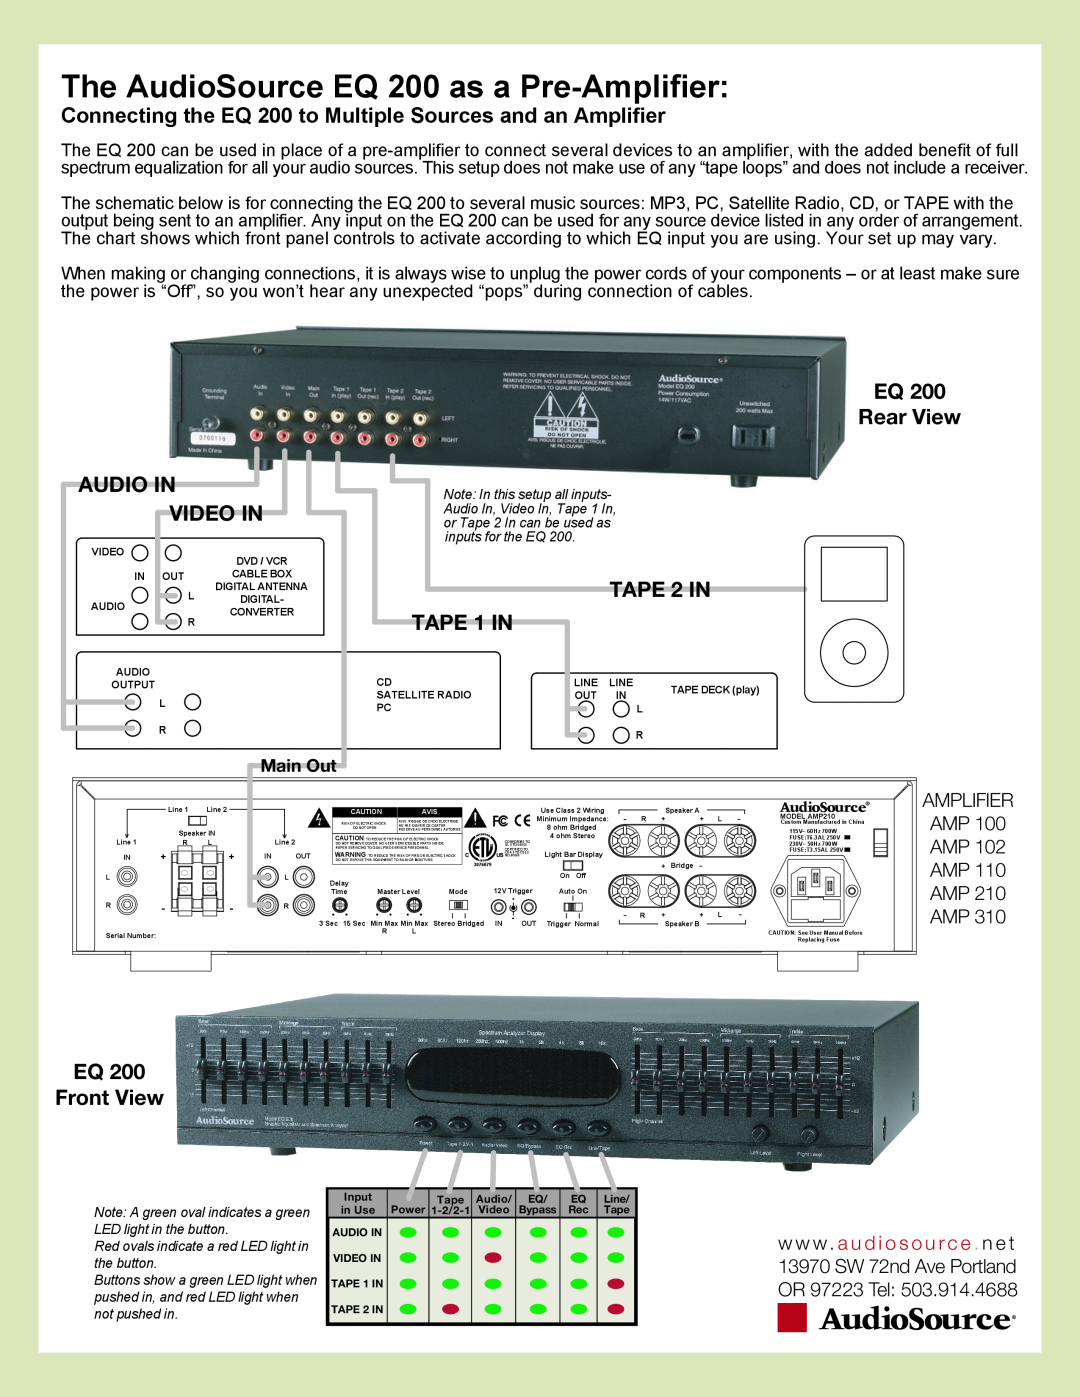 AudioSource user manual The AudioSource EQ 200 as a Pre-Amplifier, Rear View, Audio In, Video In, TAPE 2 IN, TAPE 1 IN 